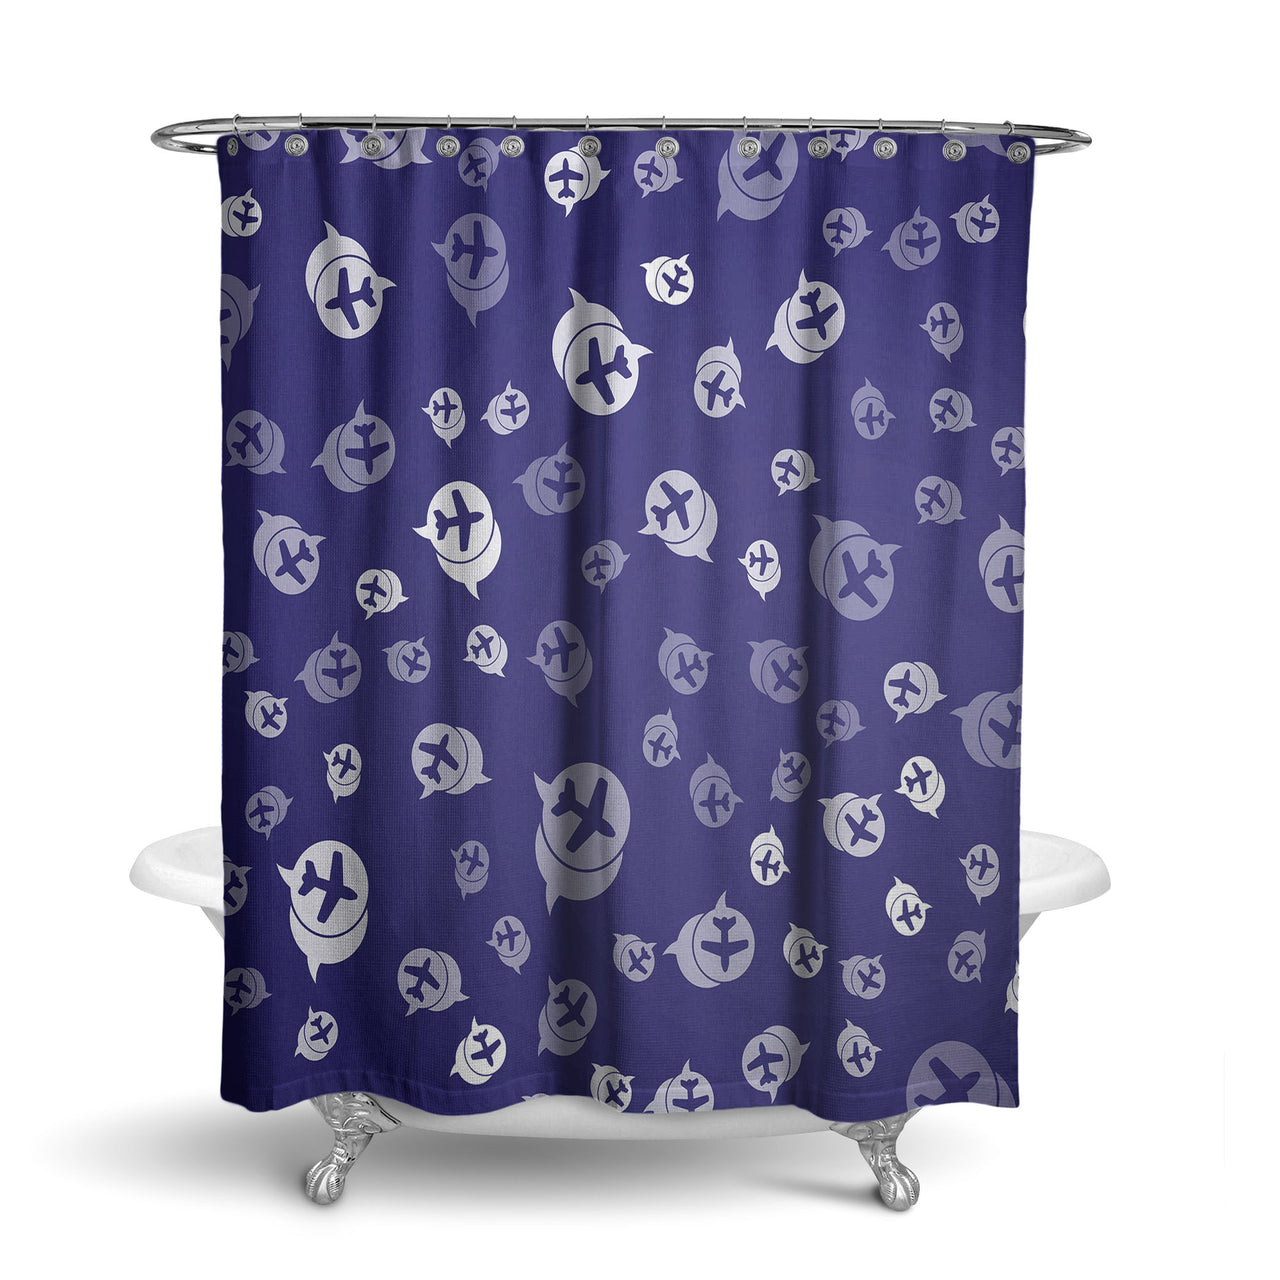 Airplane Notification Theme Designed Shower Curtains